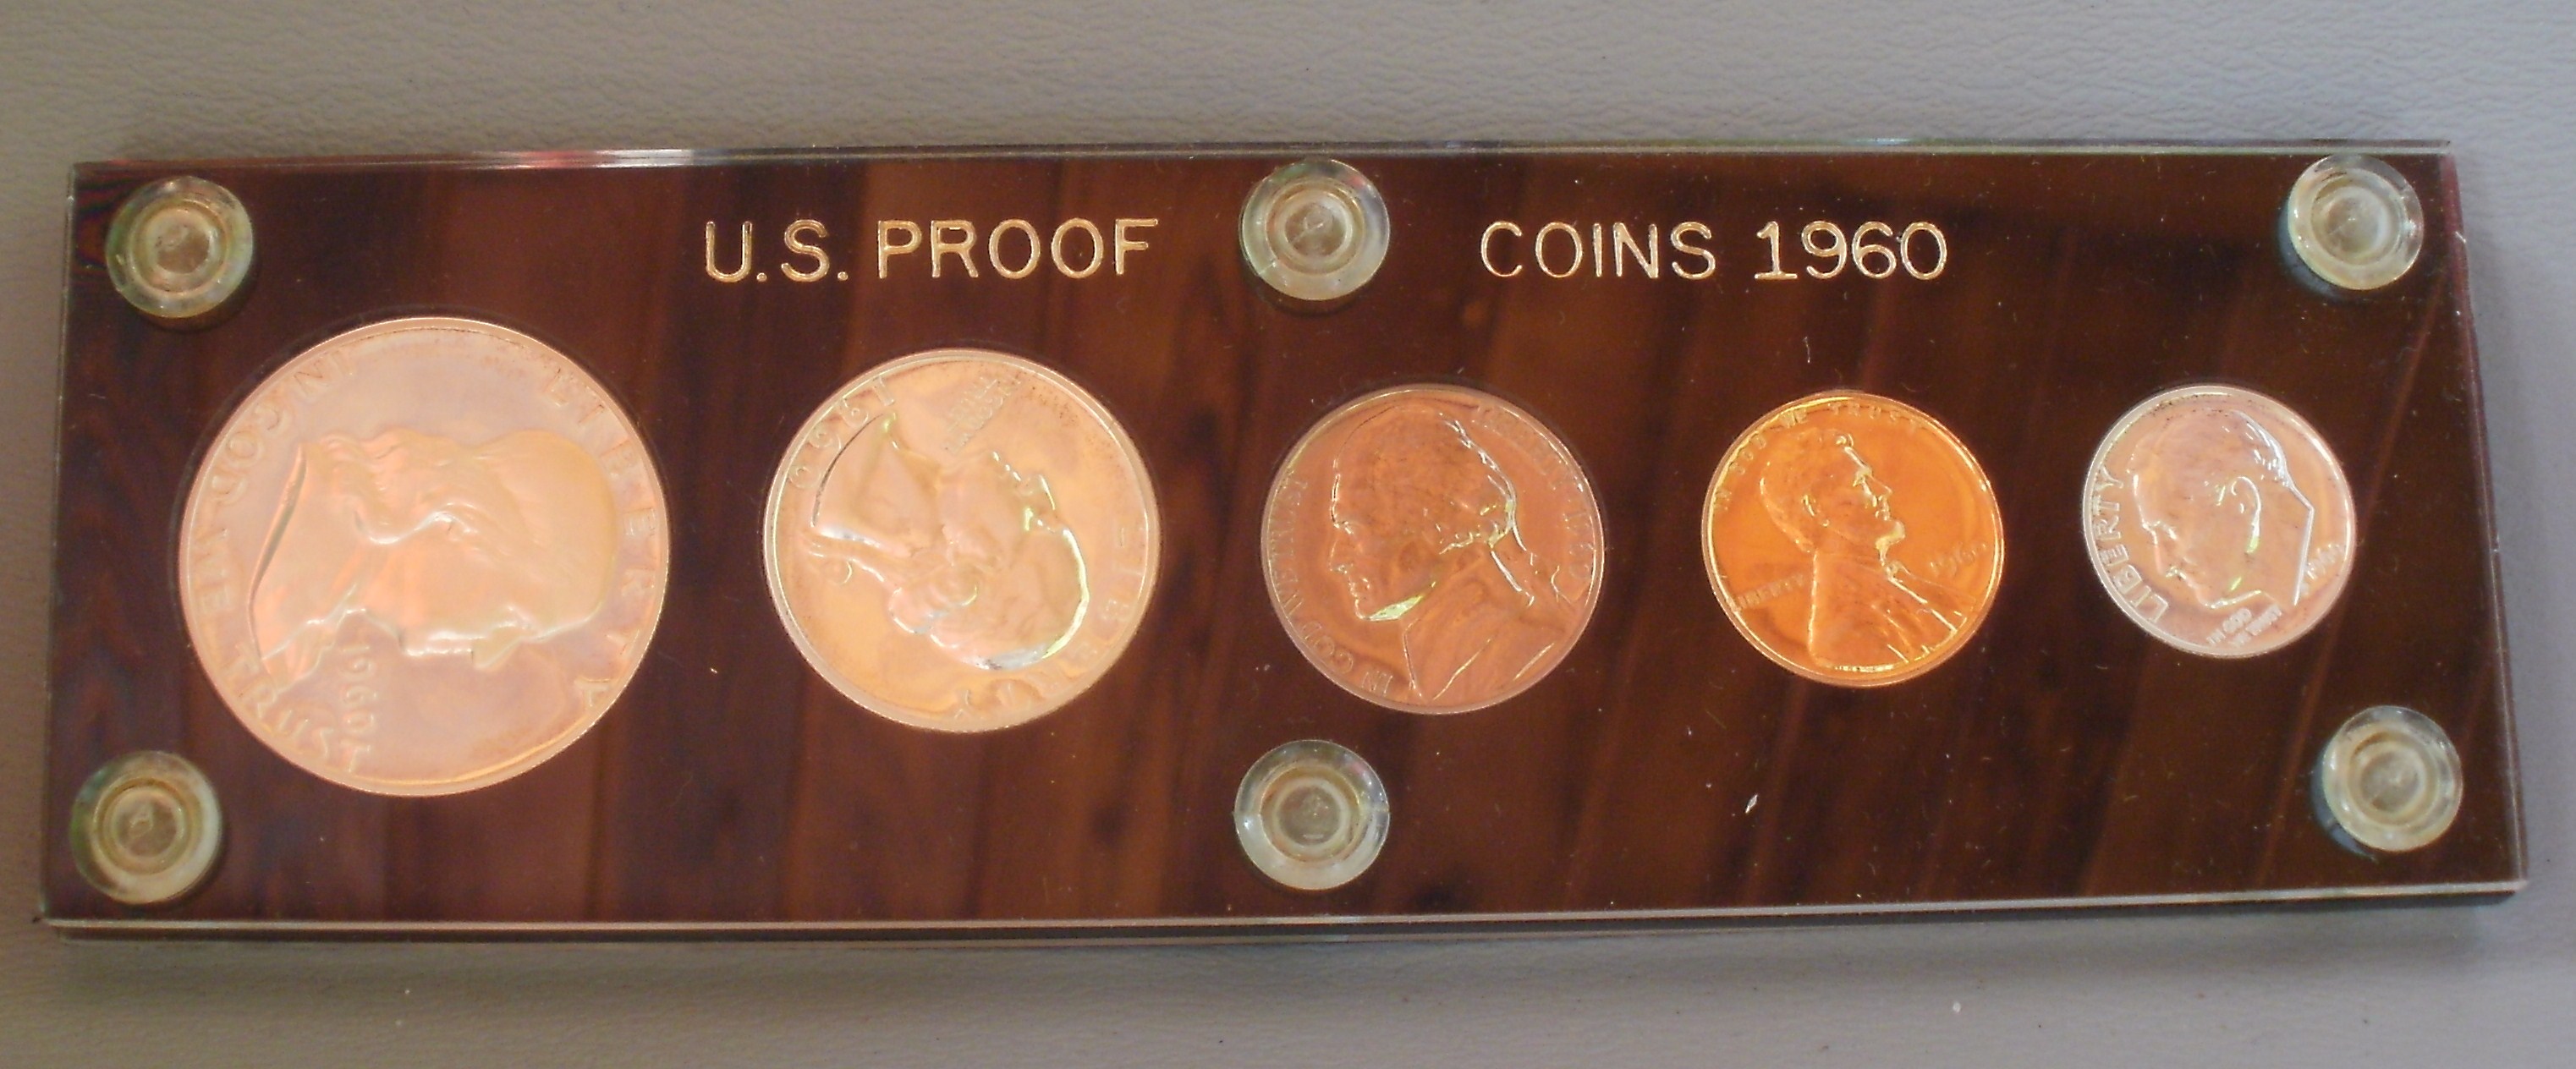 1960 US PROOF COIN SET